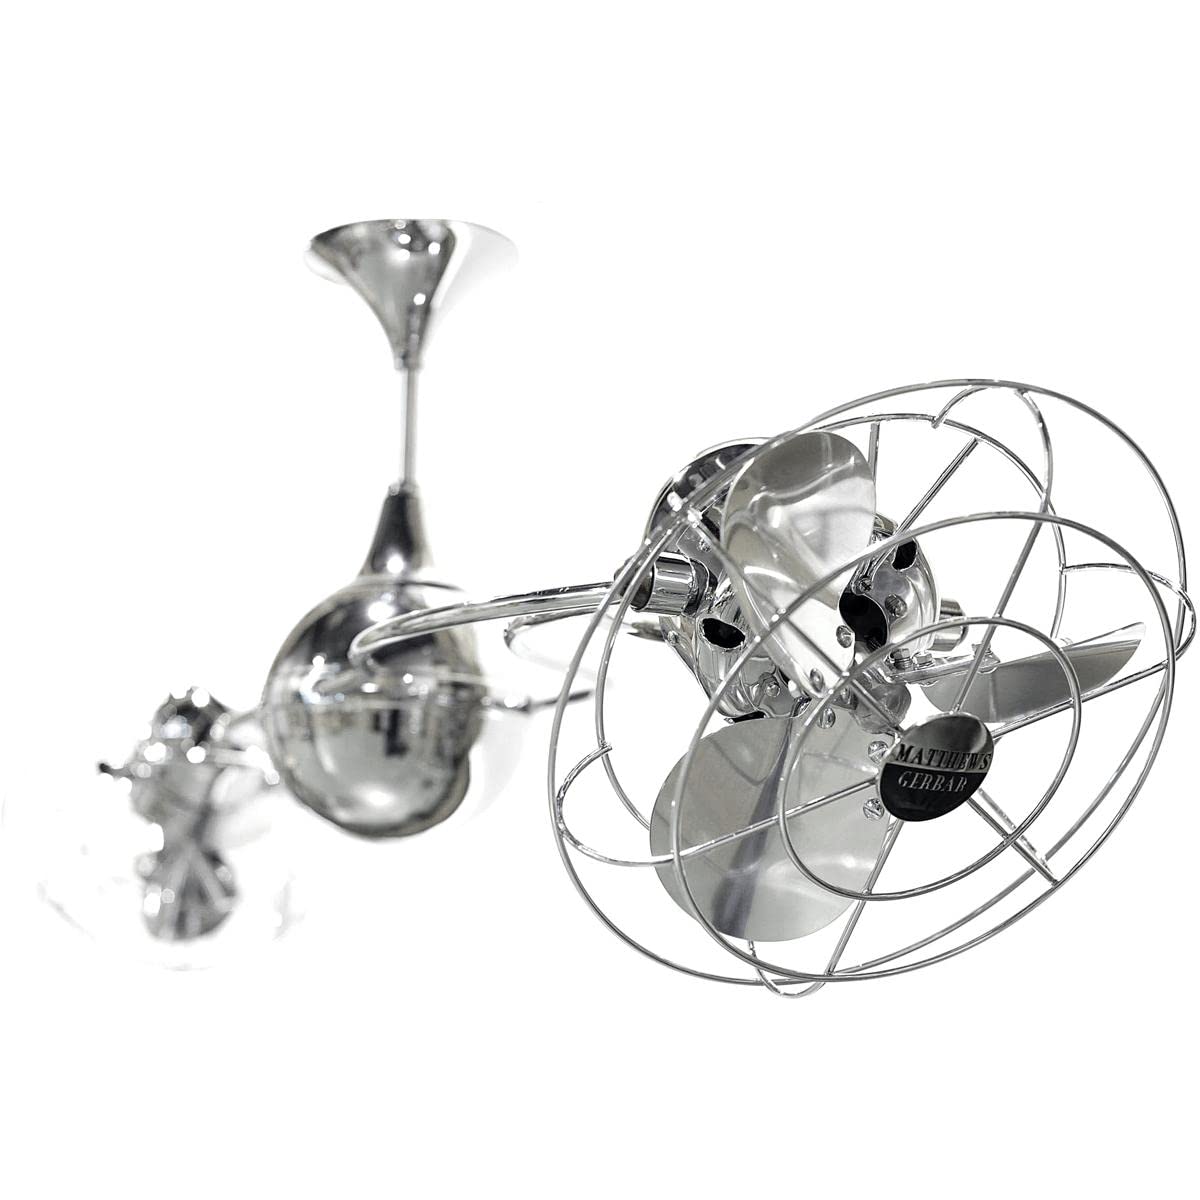 Matthews Fan IV-CR-MTL-DAMP Italo Ventania 360° dual headed rotational ceiling fan in polished chrome finish with metal blades for damp location.